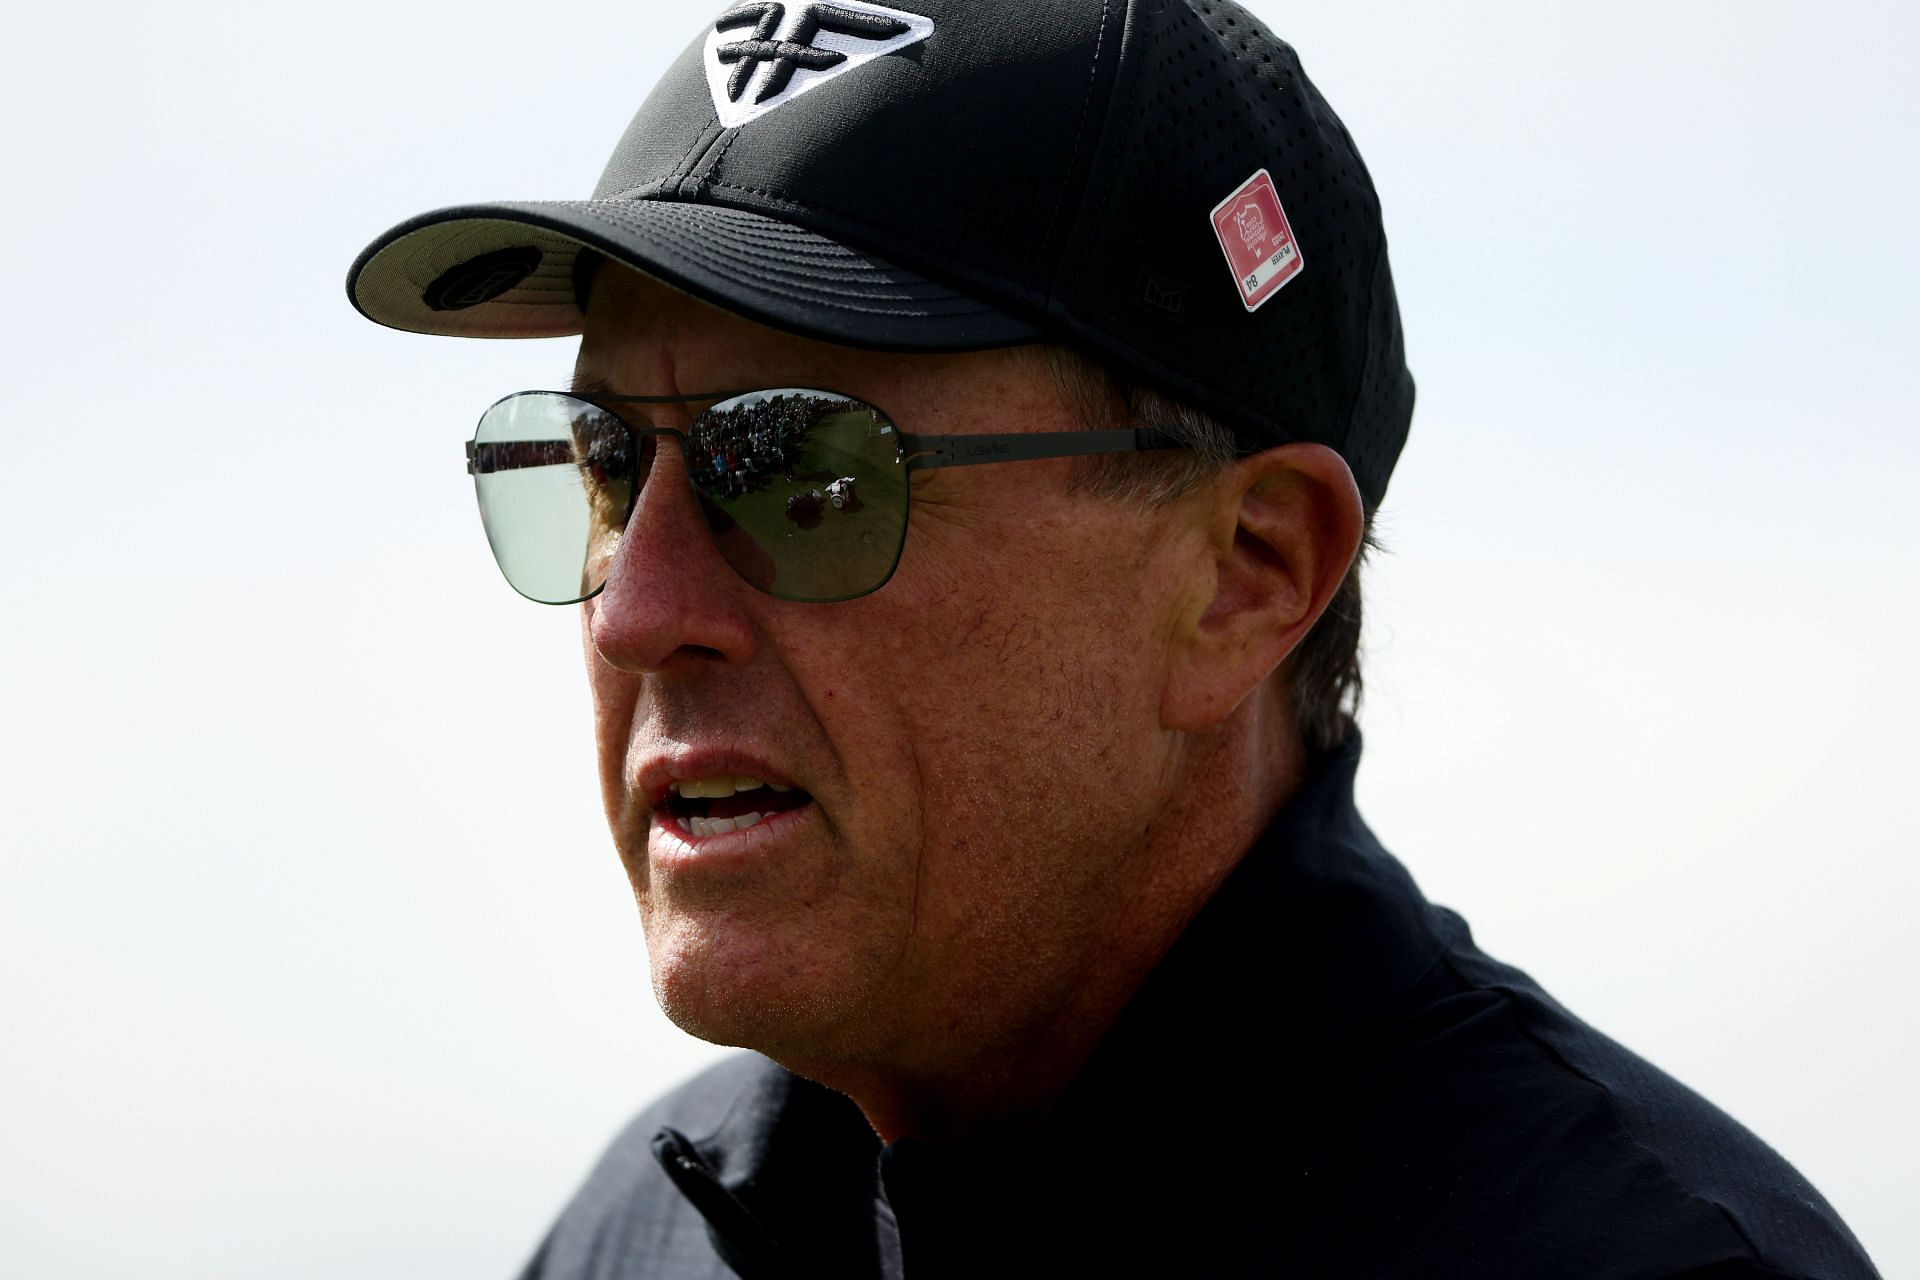 Phil Mickelson was seen wearing the HyFlyers cap during The Masters